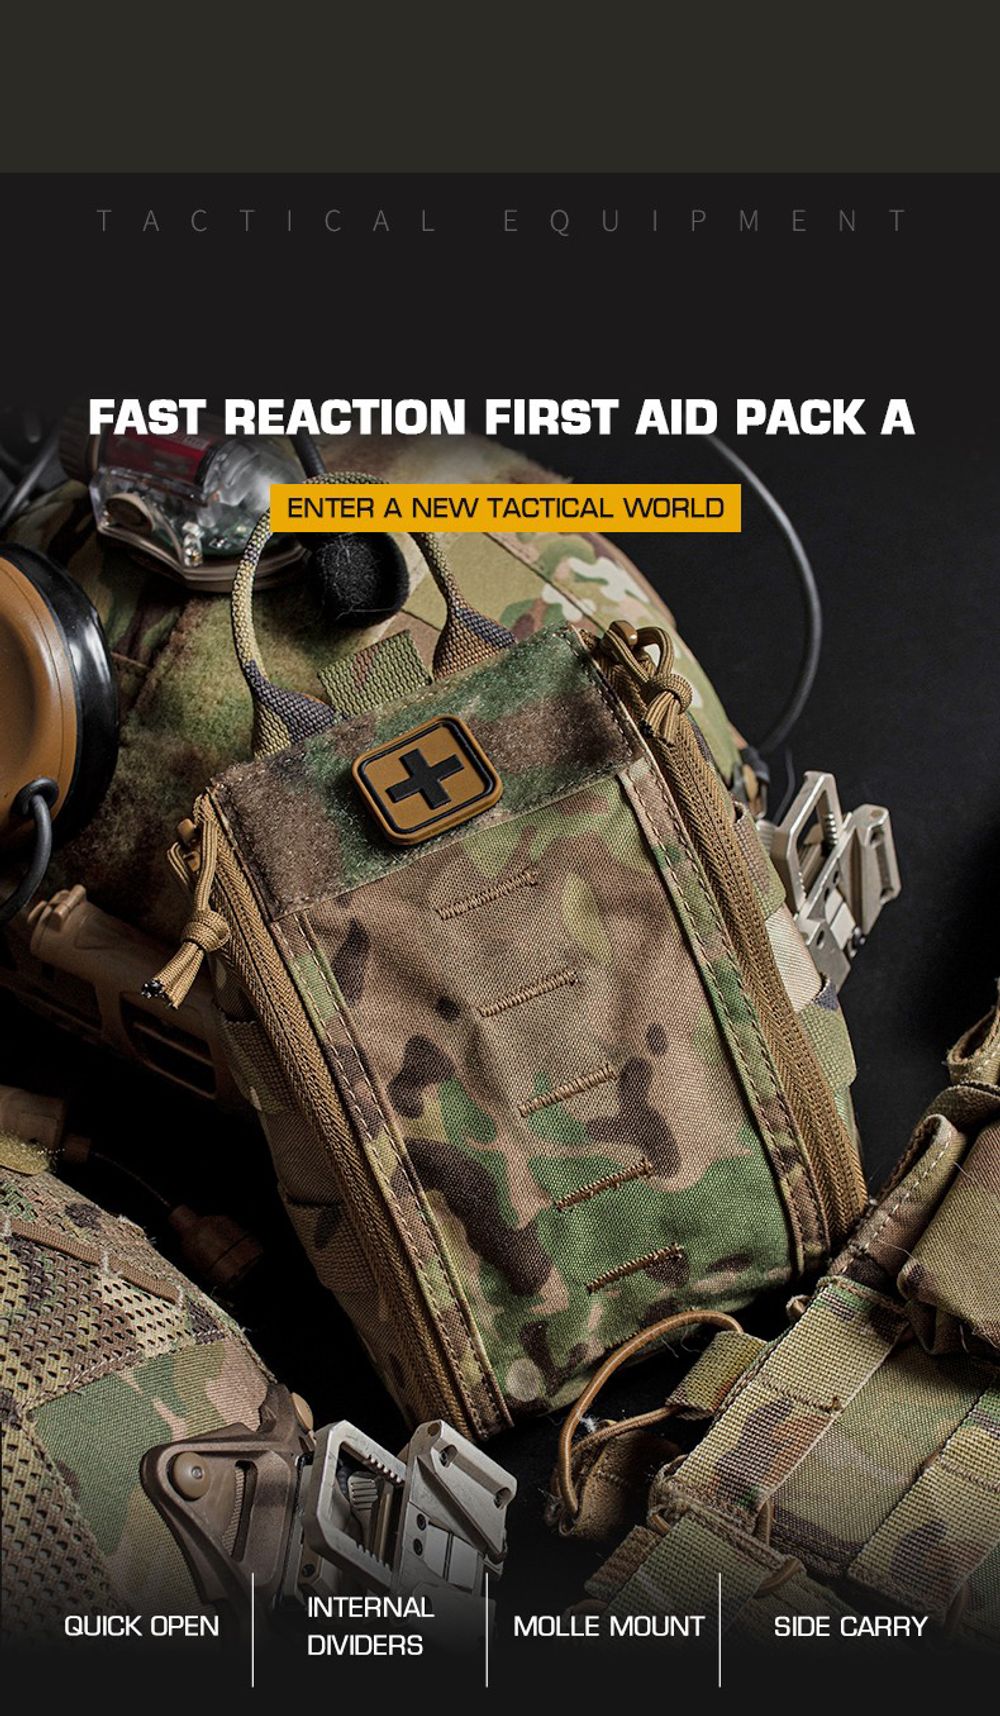 Advanced Military Trauma Kit: Waterproof Material | Quick Release Design | Tactical Bleeding Control Kit | OEM & ODM Options Available